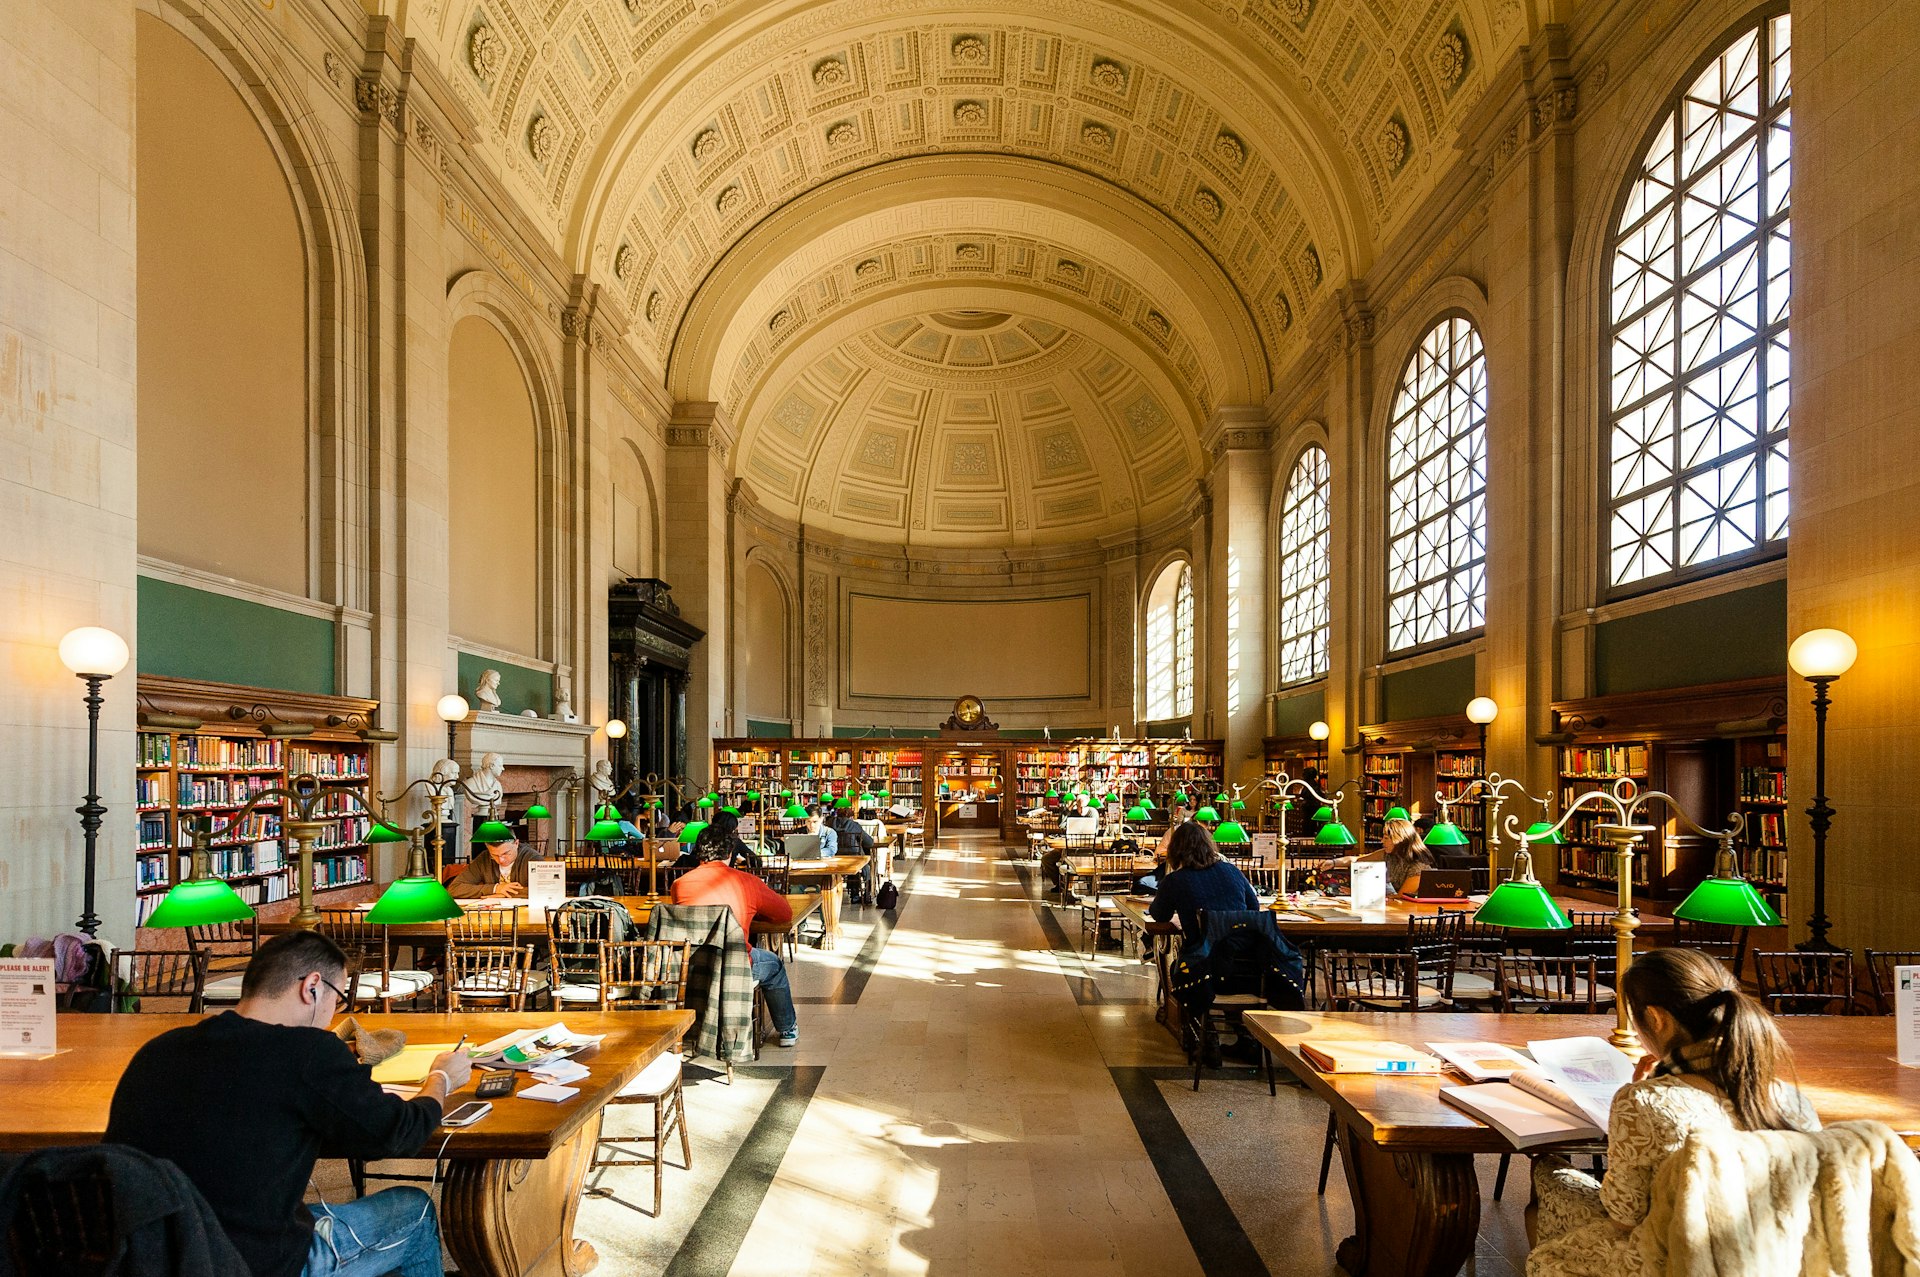 People studing and reading in a large library room with a domed ceiling